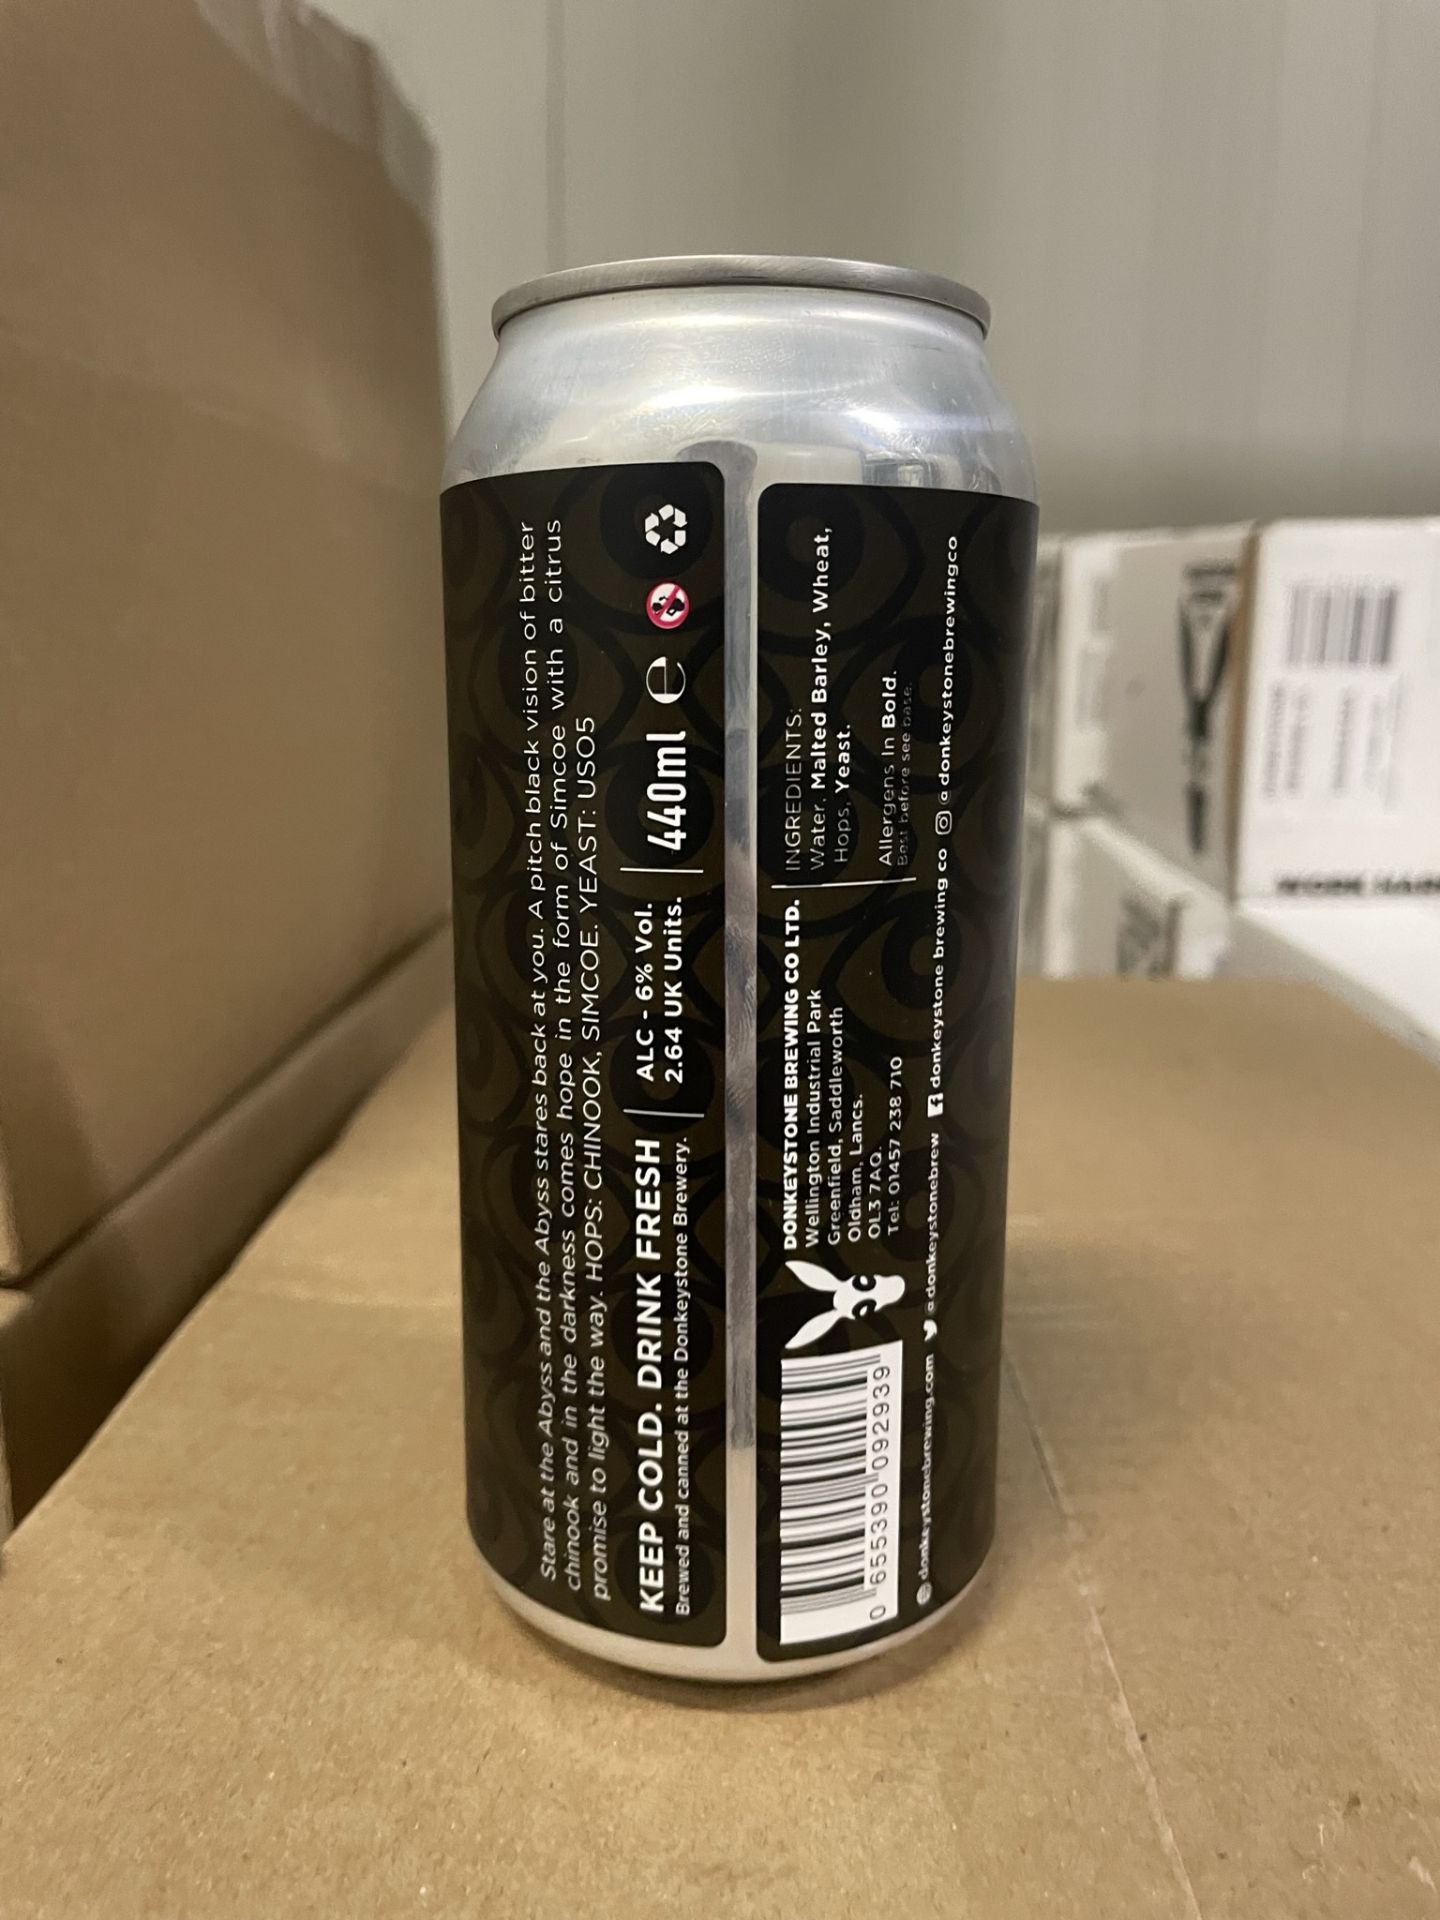 Approximately 96 x 440ml Cans of Donkeystone Brewing Co 'Abyss' Black IPA | BB: 20/01/23 | 6% Vol - Image 2 of 4